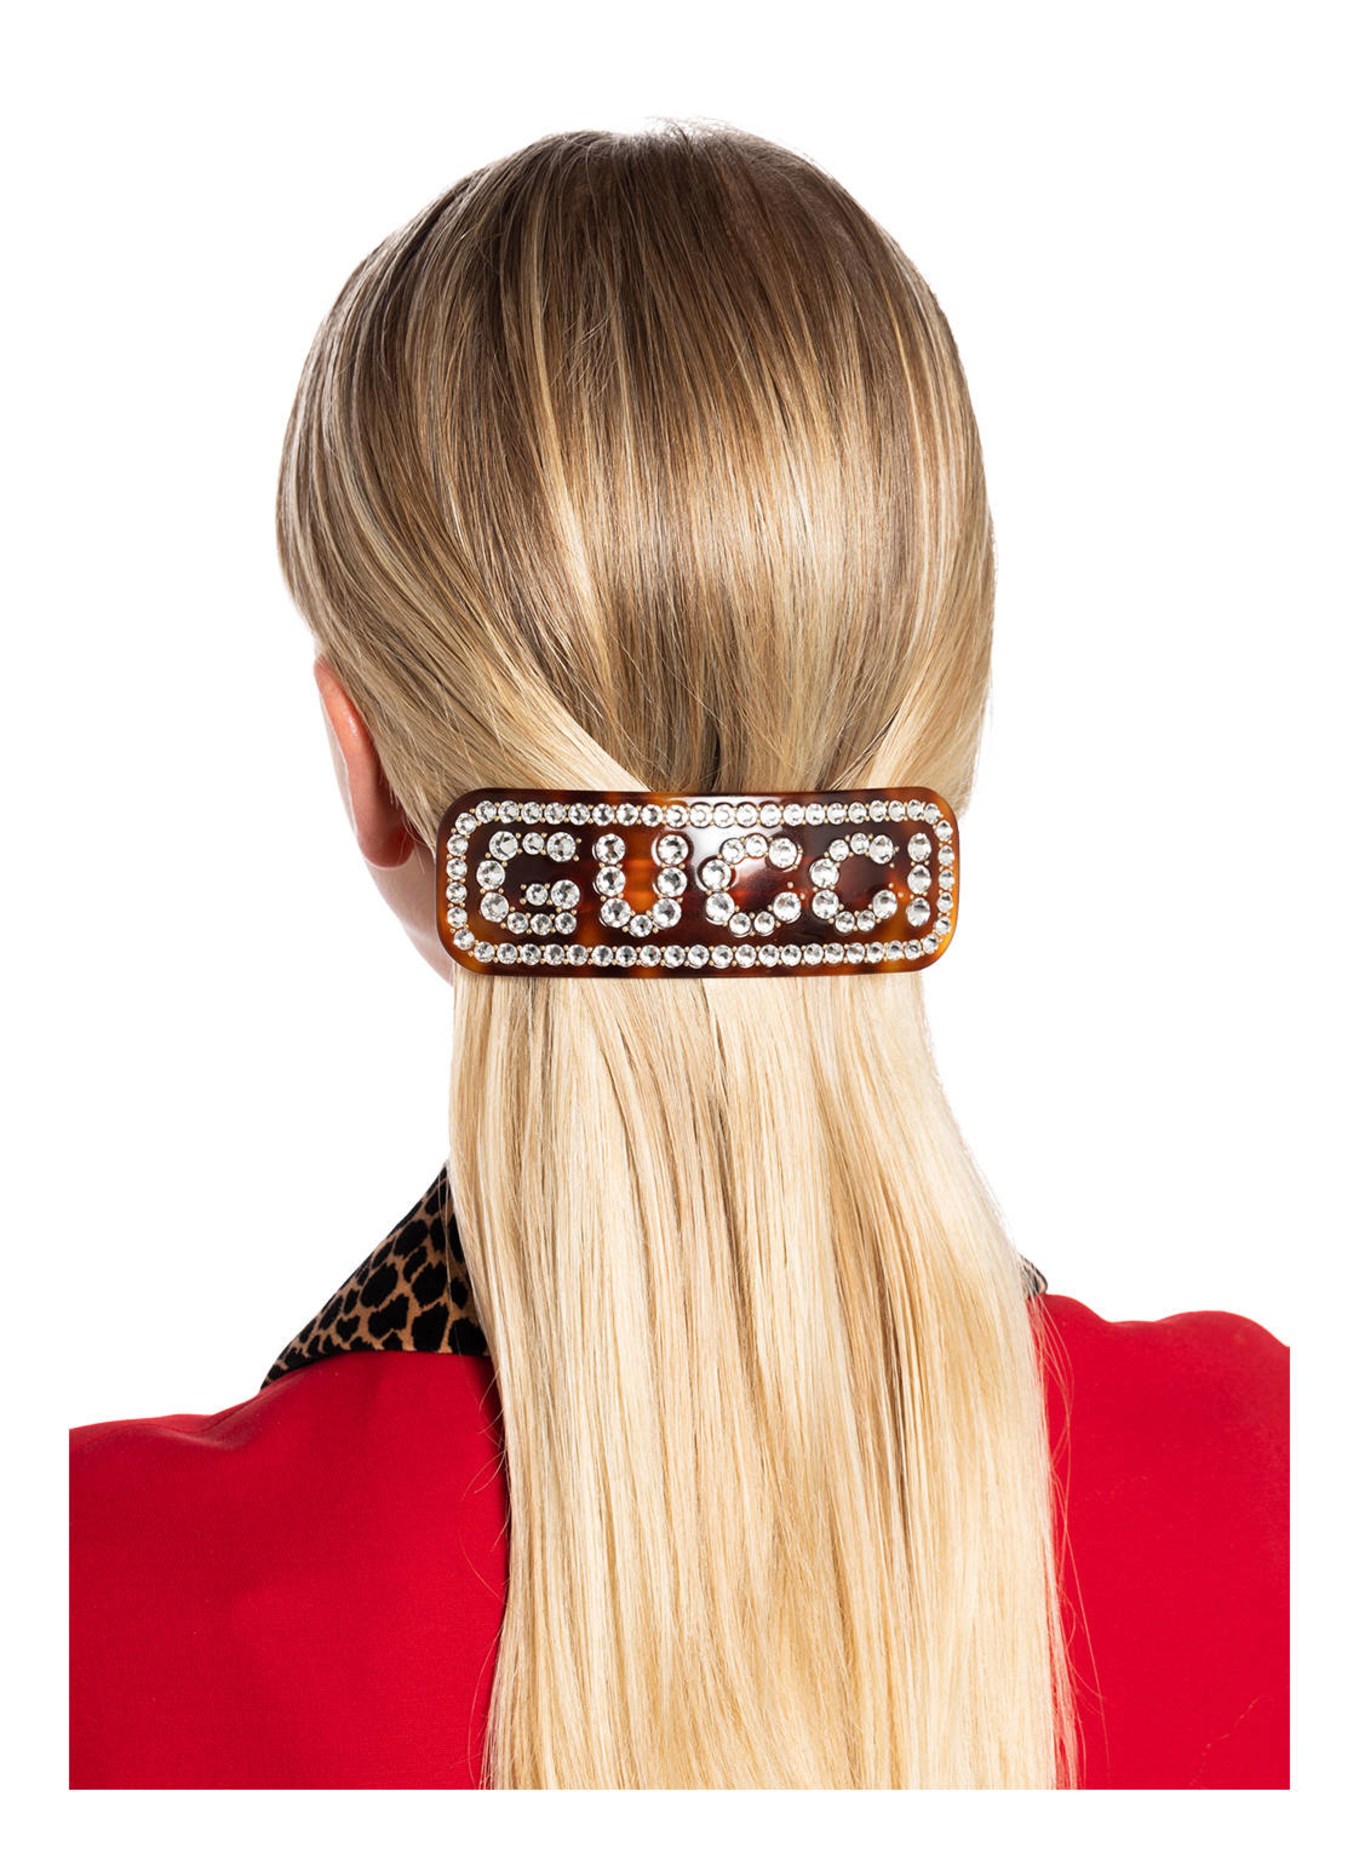 Gucci, Accessories, 0 Authentic Gucci Crystal Hair Comb